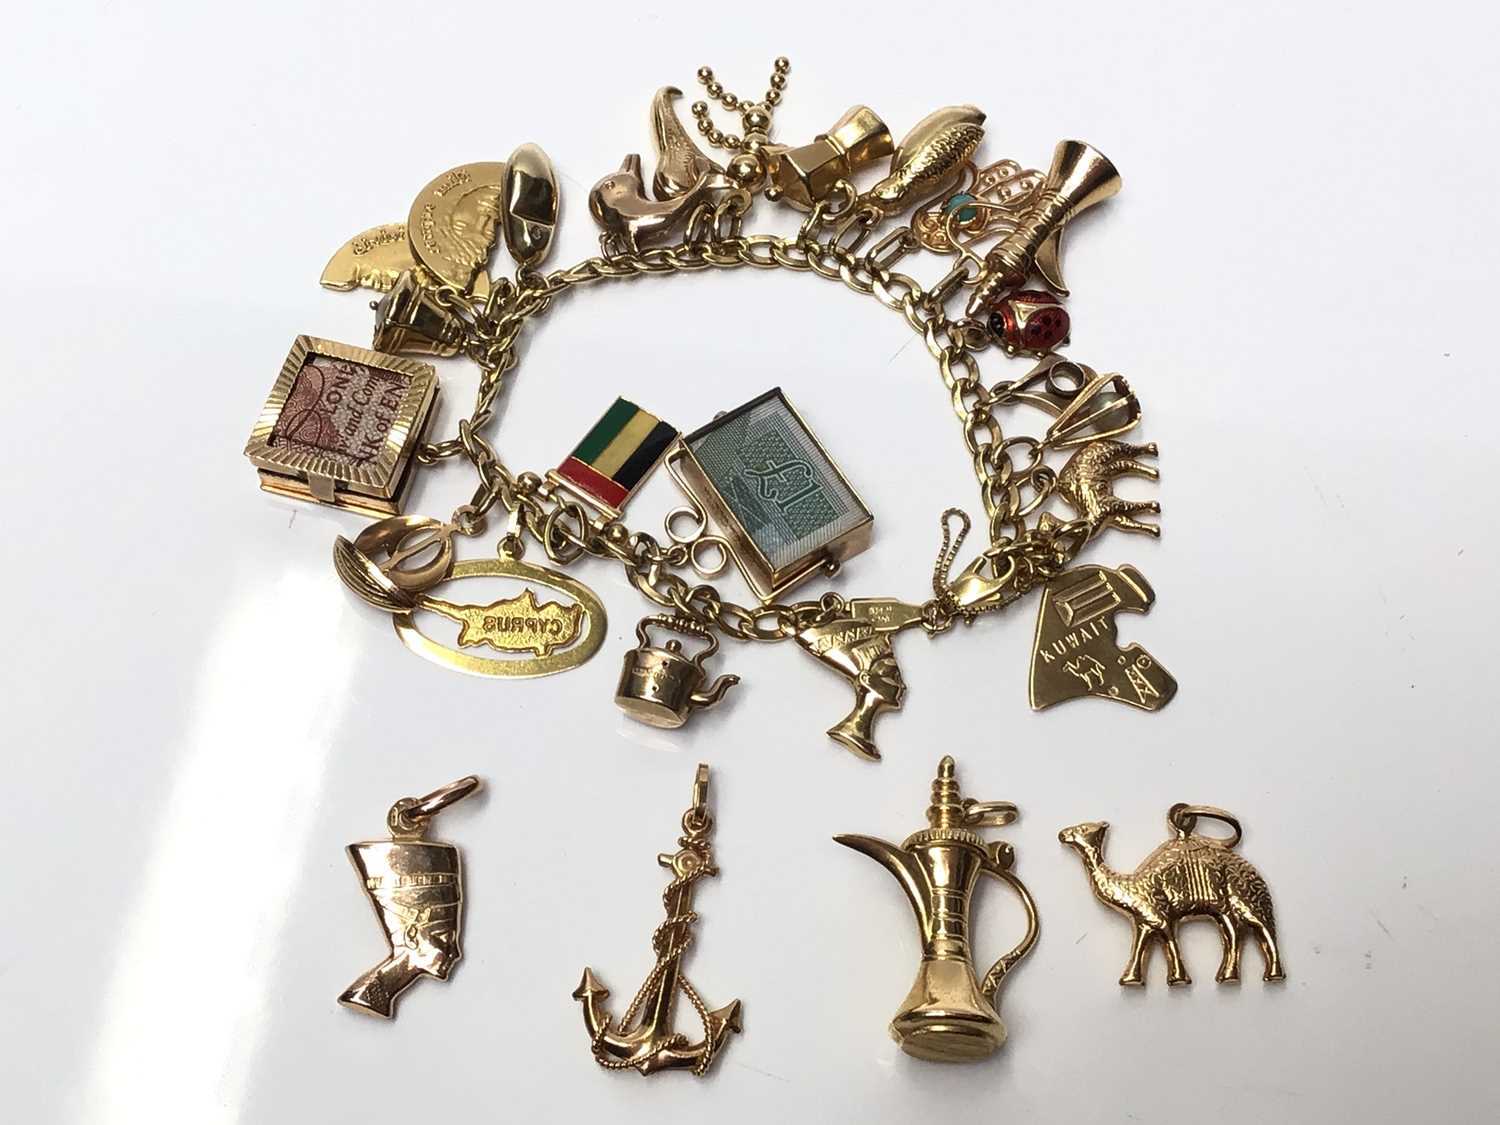 Lot 76  18ct gold charm bracelet with various 18ct